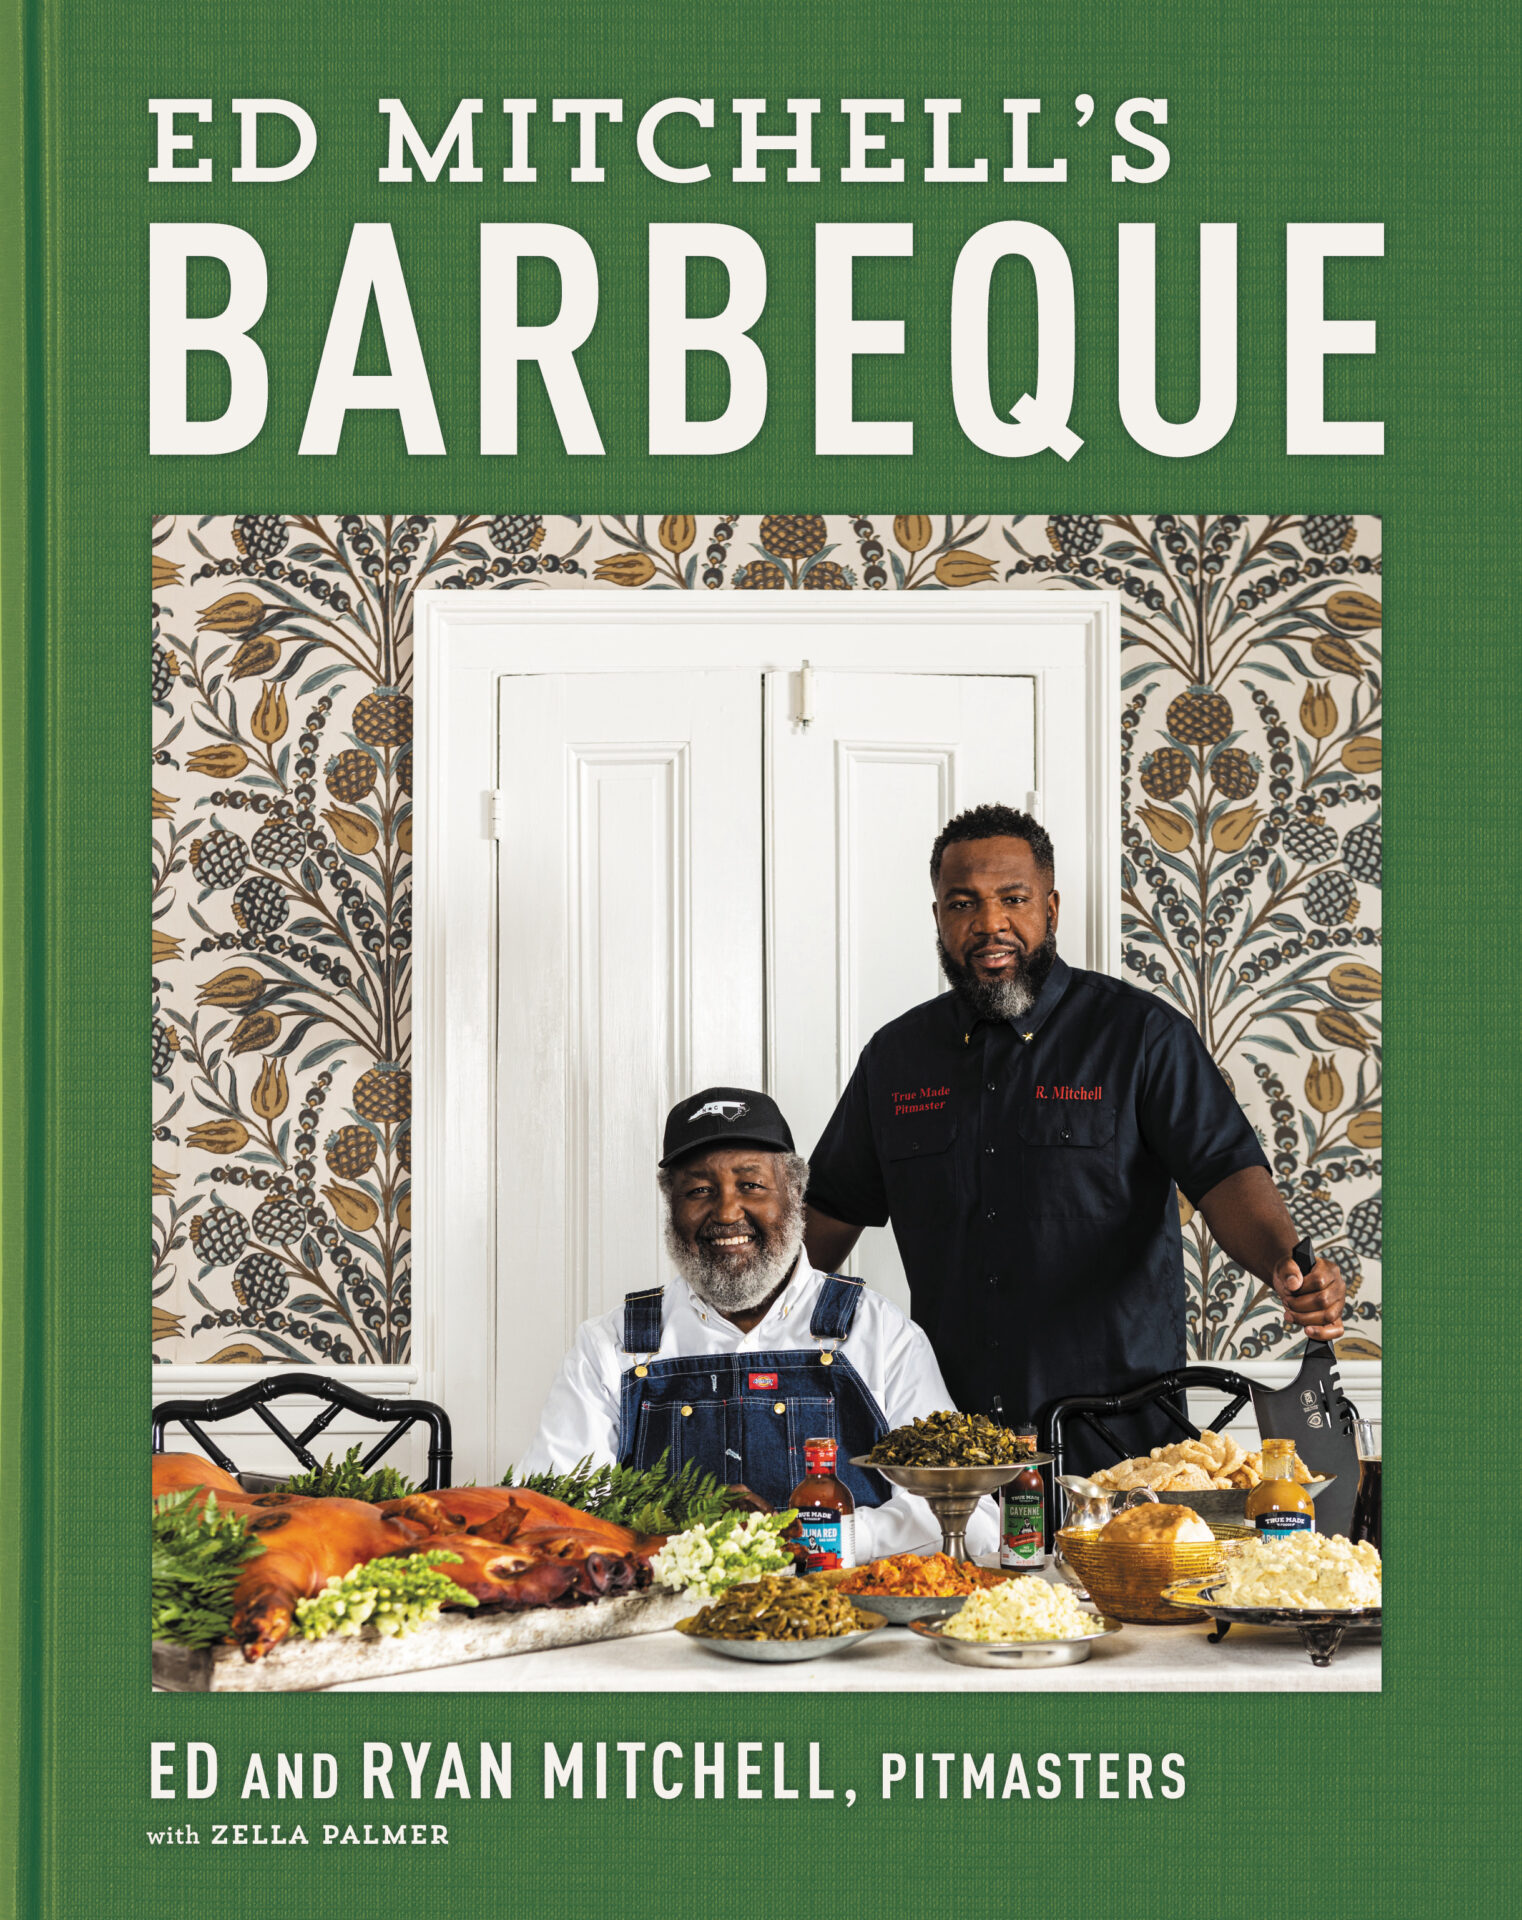 Ed Mitchell's Barbeque cover by Ed and Ryan Mitchell